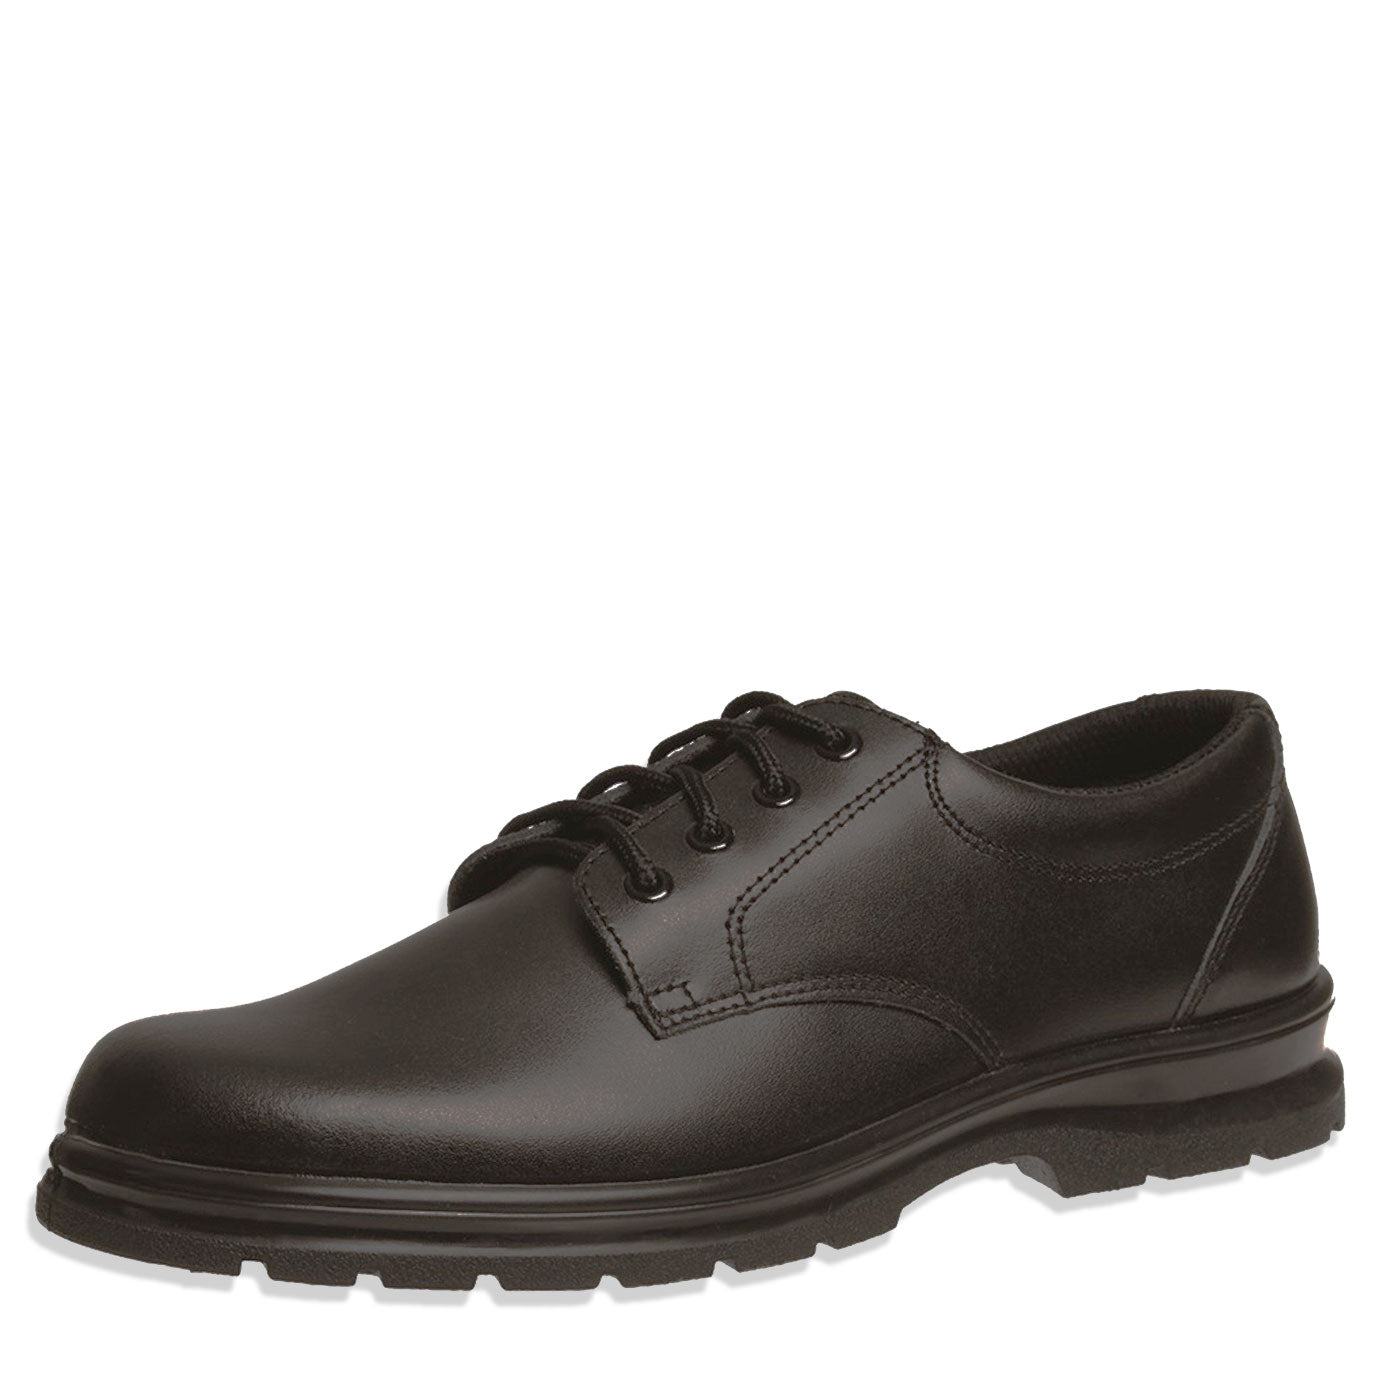 Grosby Leather School Shoes Lace-Up Black Educate JNR 2 UK Size 10-6 ...